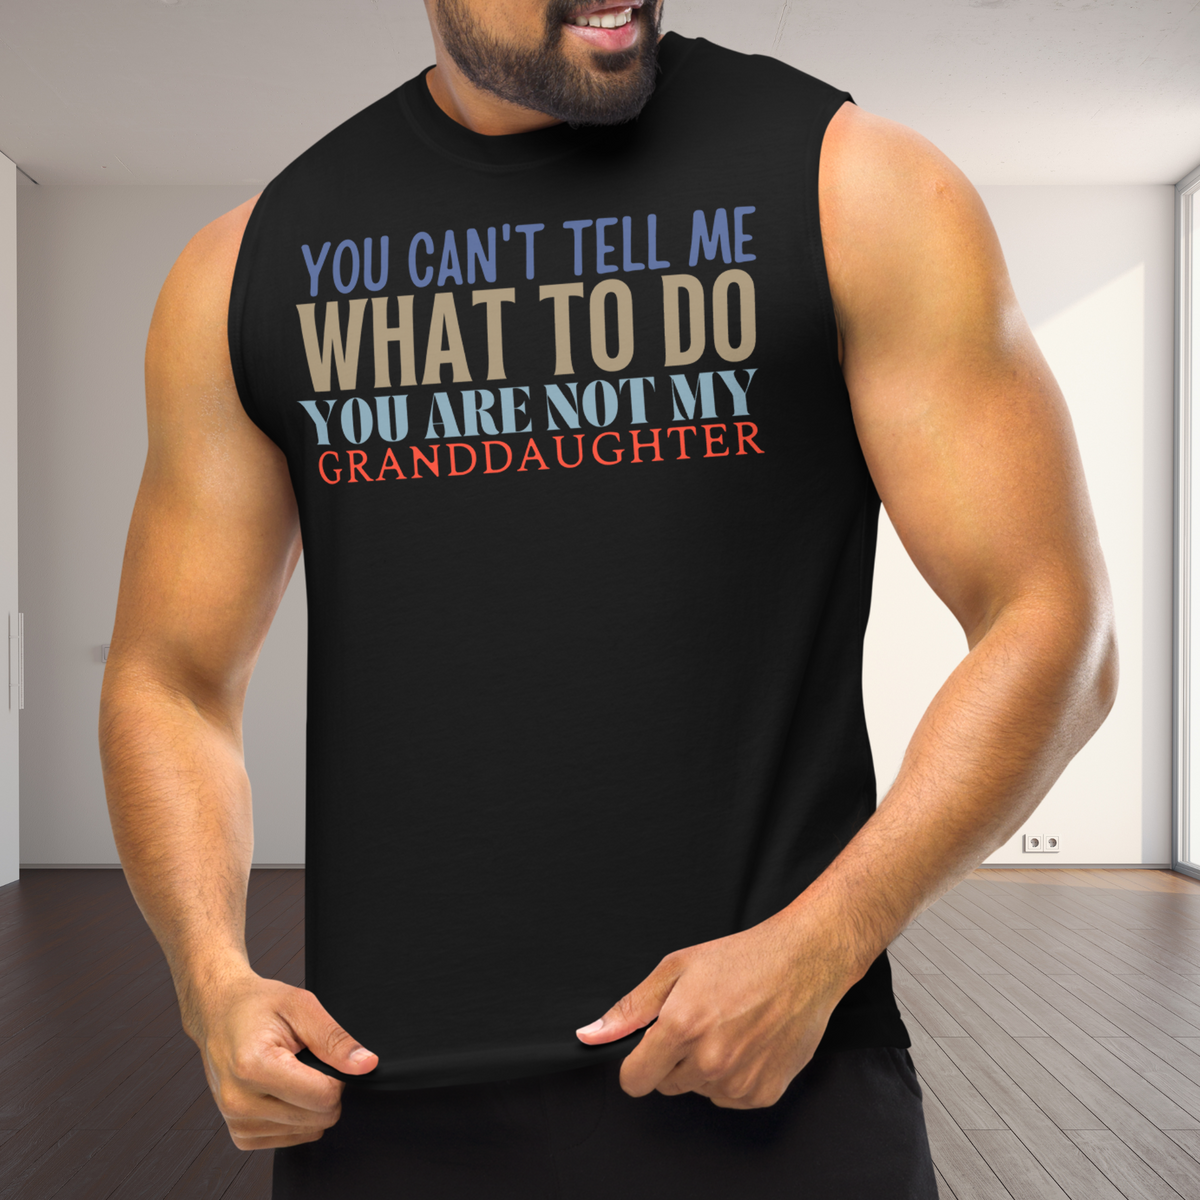 Granddad muscle shirt, sleeveless shirt, fathers day shirt, funny mens shirt, sweatshirt, gift for him, gift for her, funny grandma tee, funny granddad tee, new papa shirt, father sweatshirt, you can't tell me what to do you are not my granddaughter, new granddady shirt